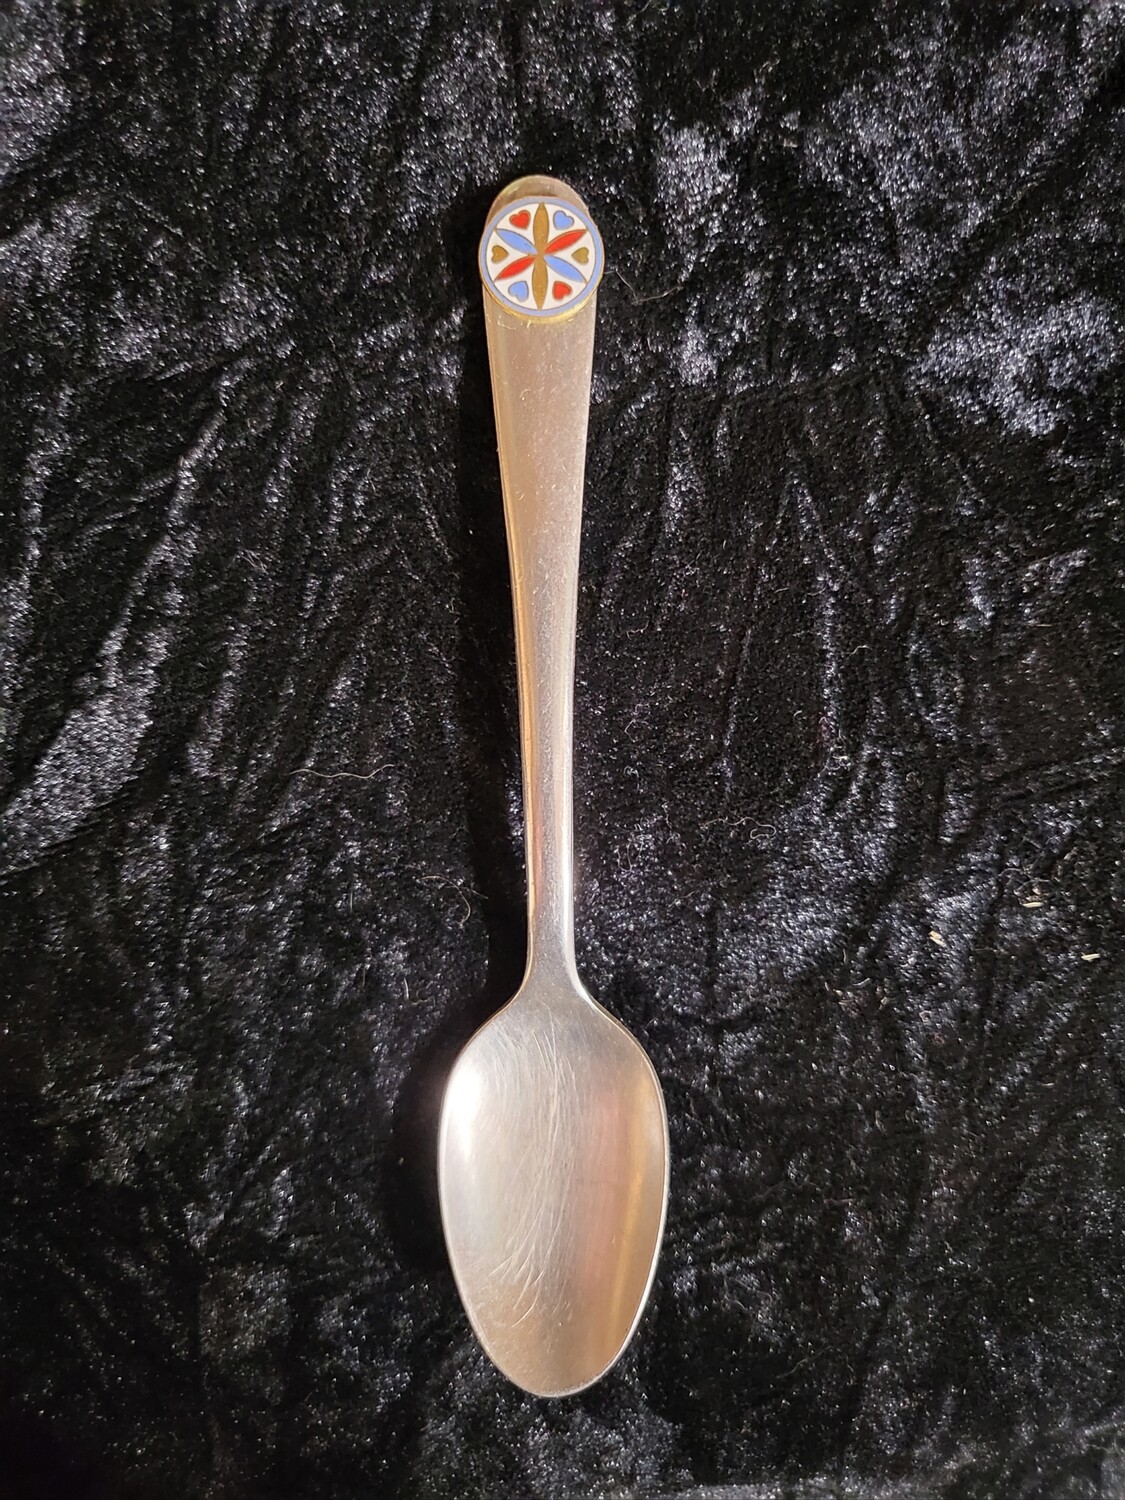 Usable Love and Romance Hex Sign spoon